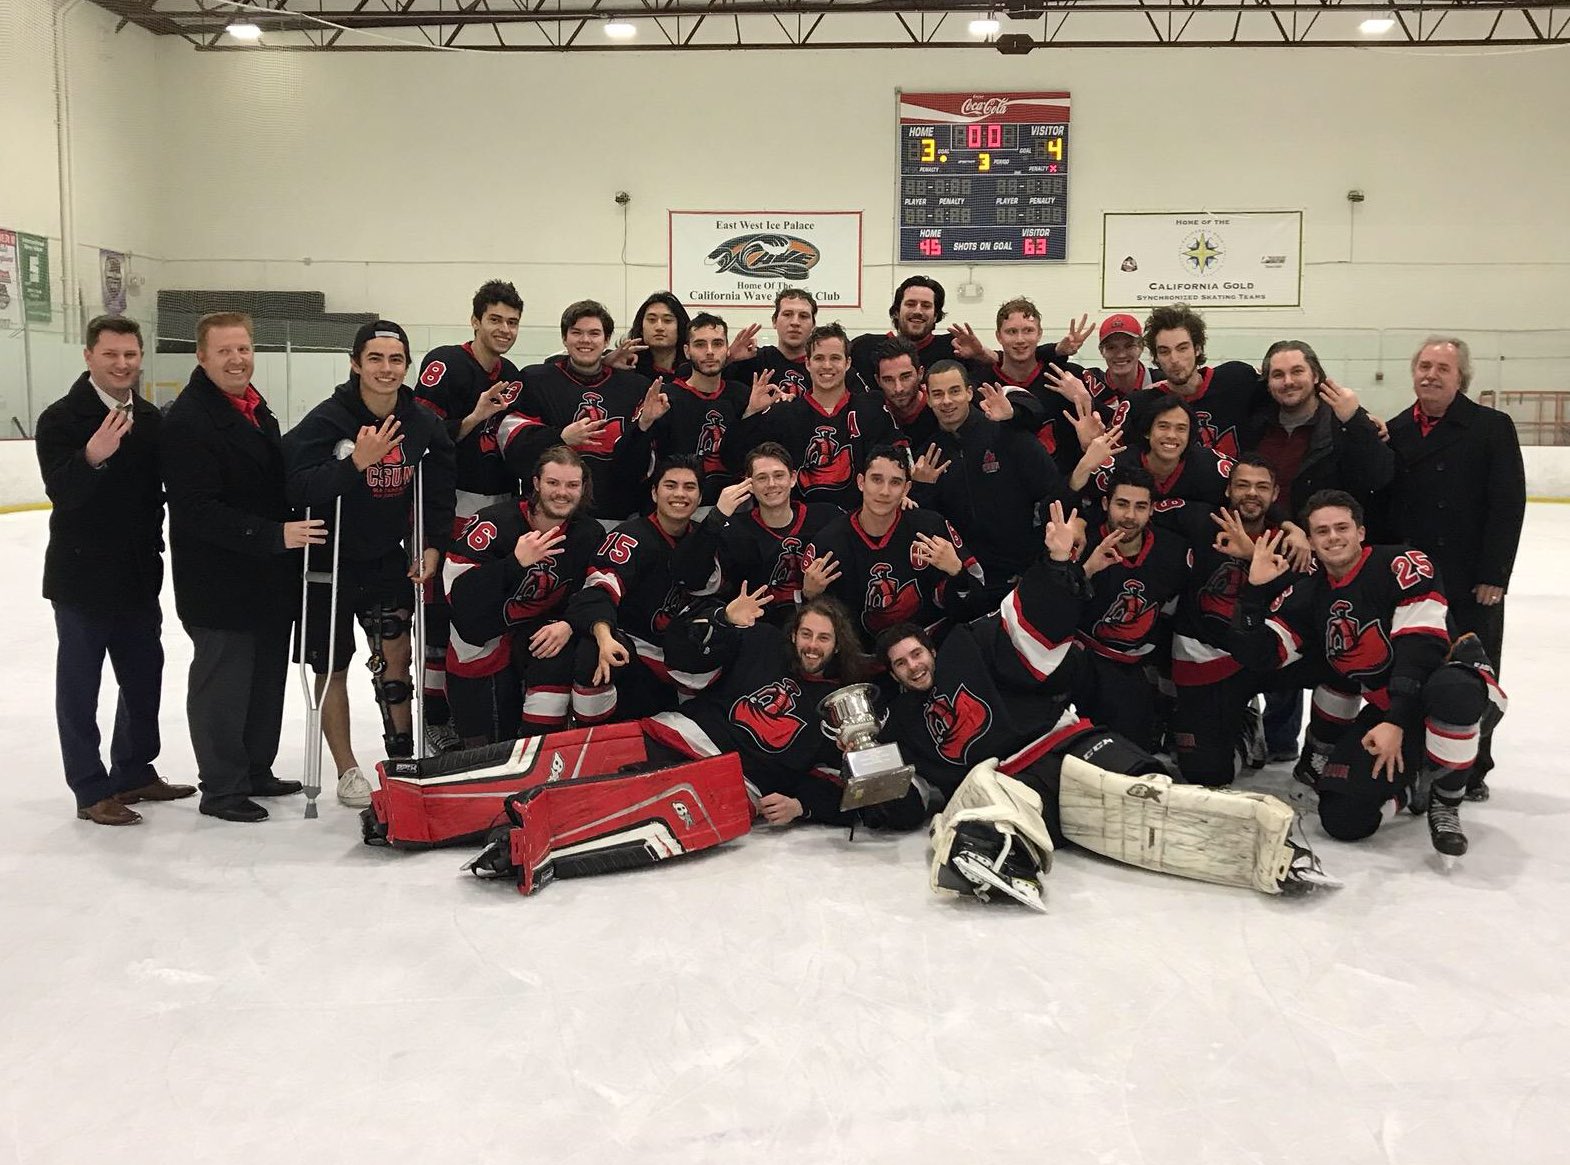 CSUN Ice Hockey Team smiles for a team photo after winning their third West Coast Hockey Conference championship for a third year in a row at the East West Ice Palace in Artesia, Calif. on Feb. 10.